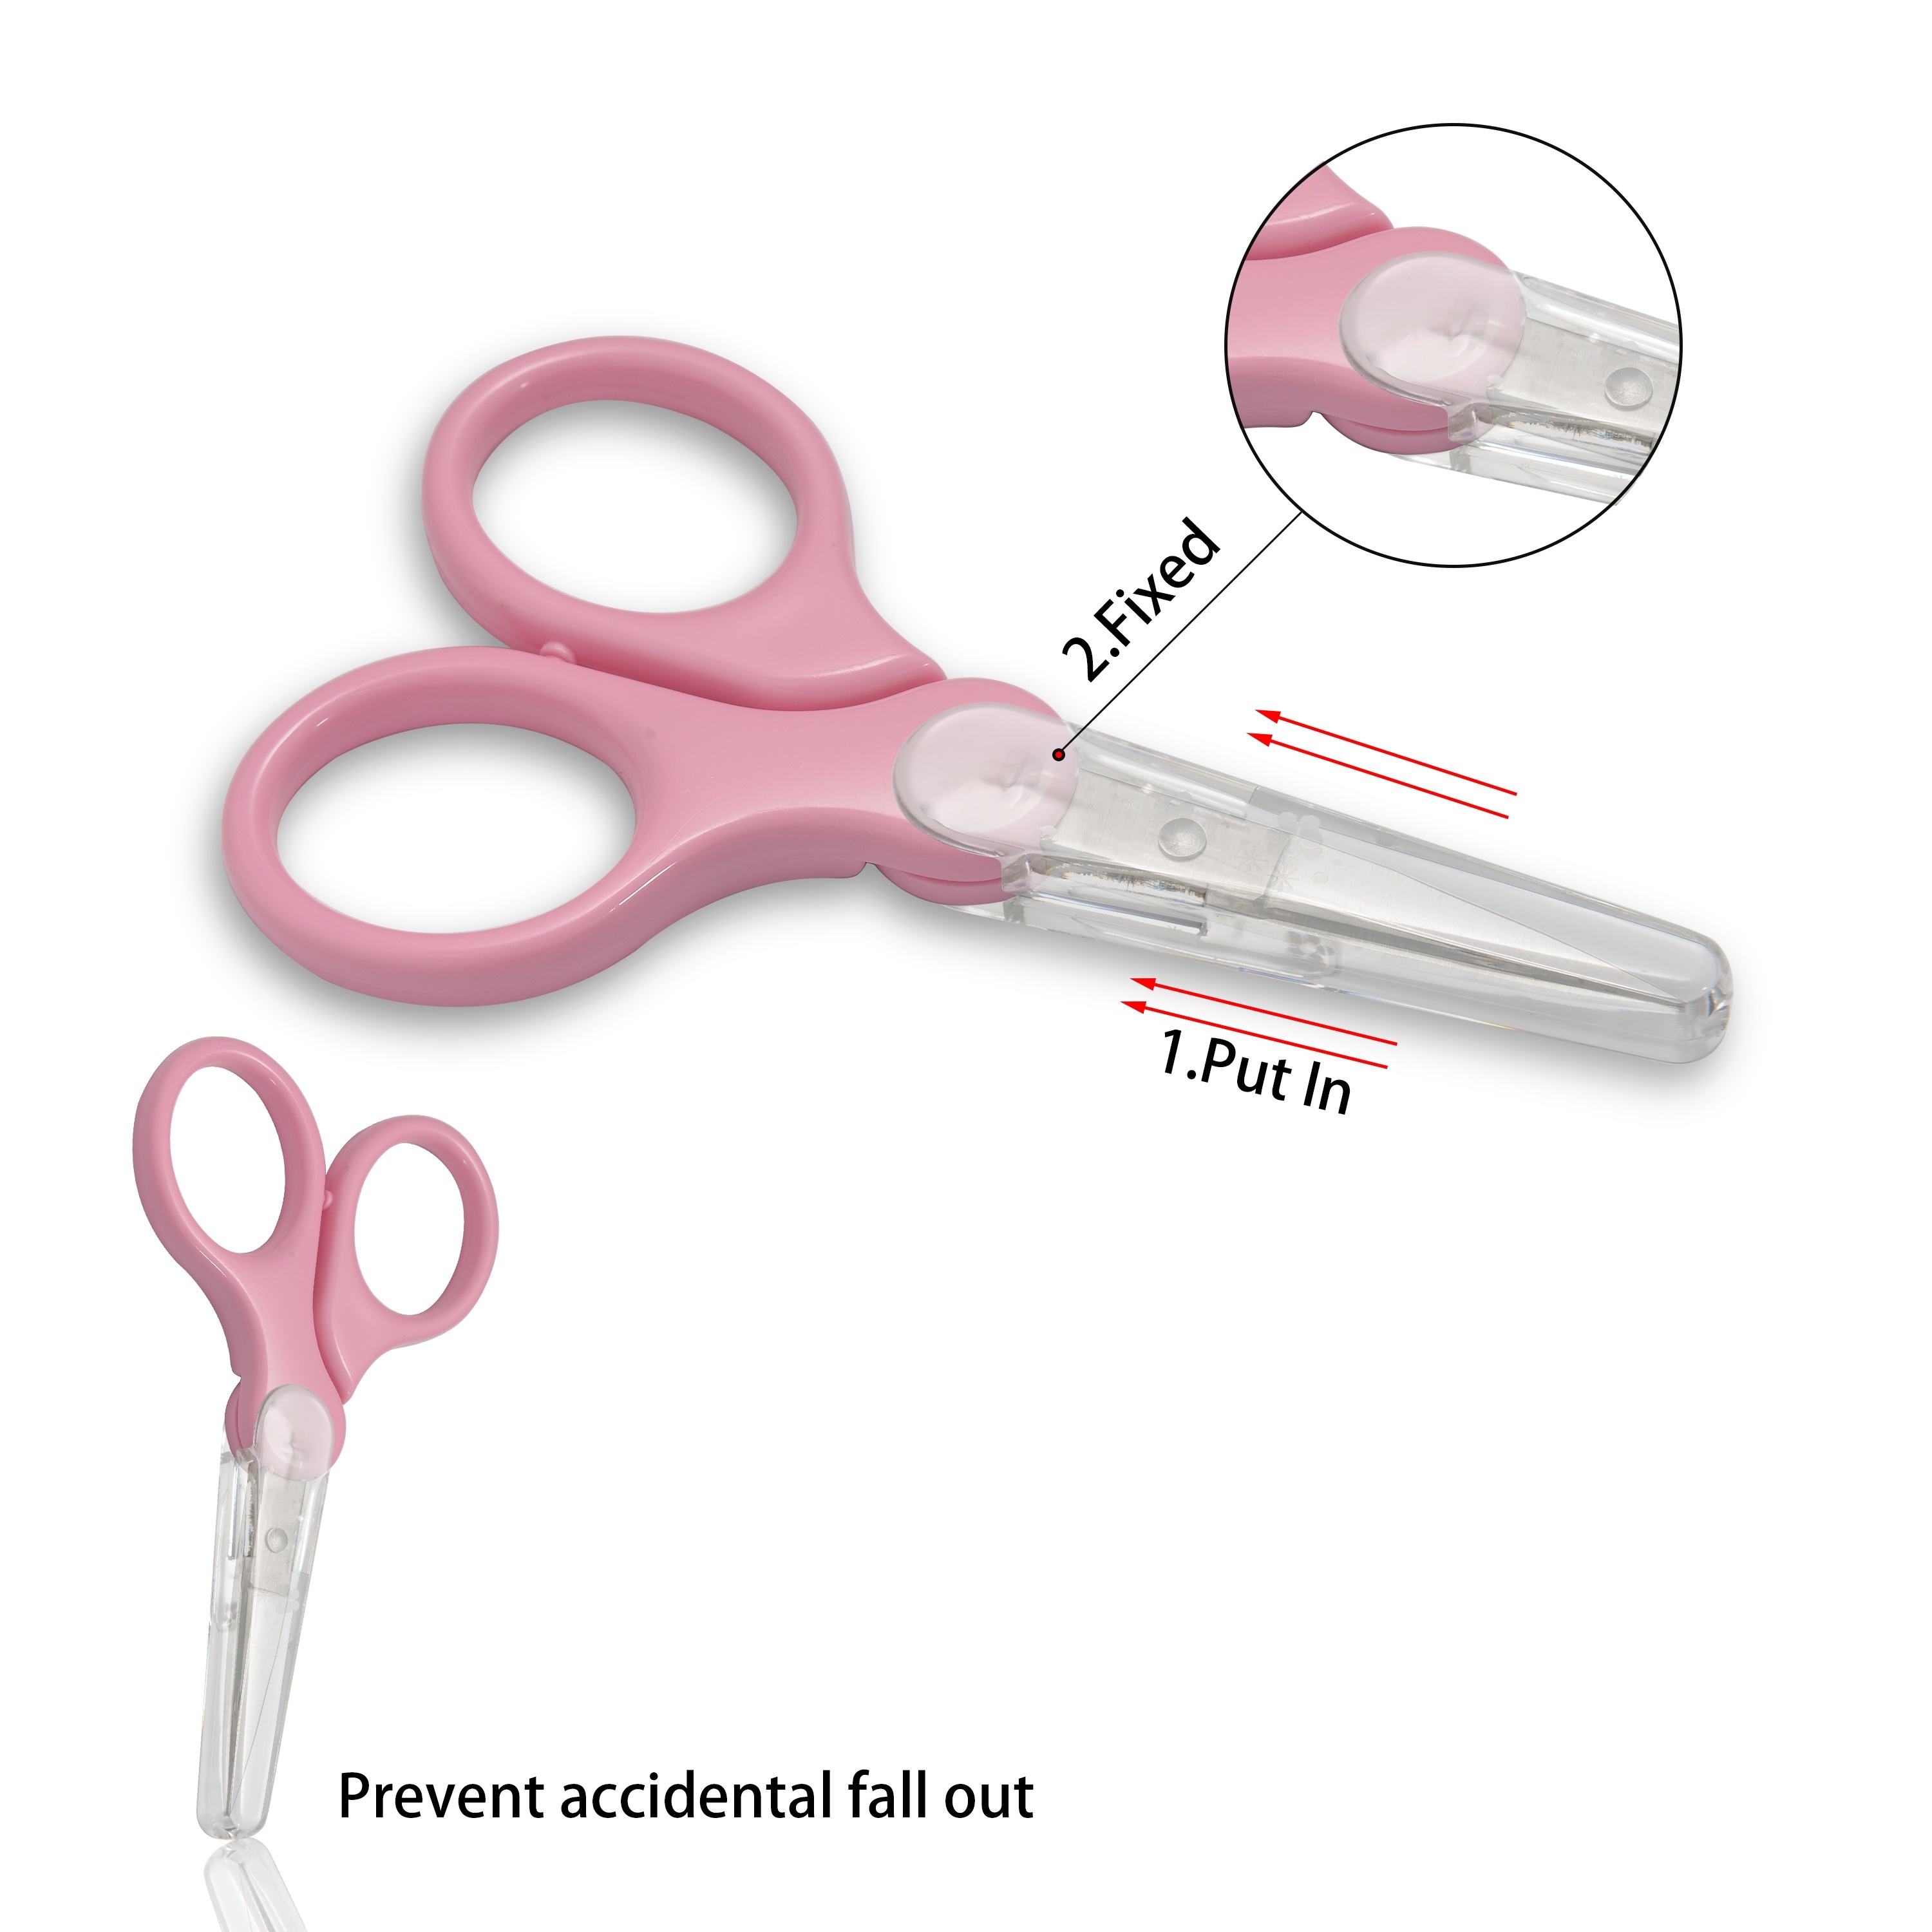 Embroidery Scissors With Cover Small Sewing Scissors Set Crafting